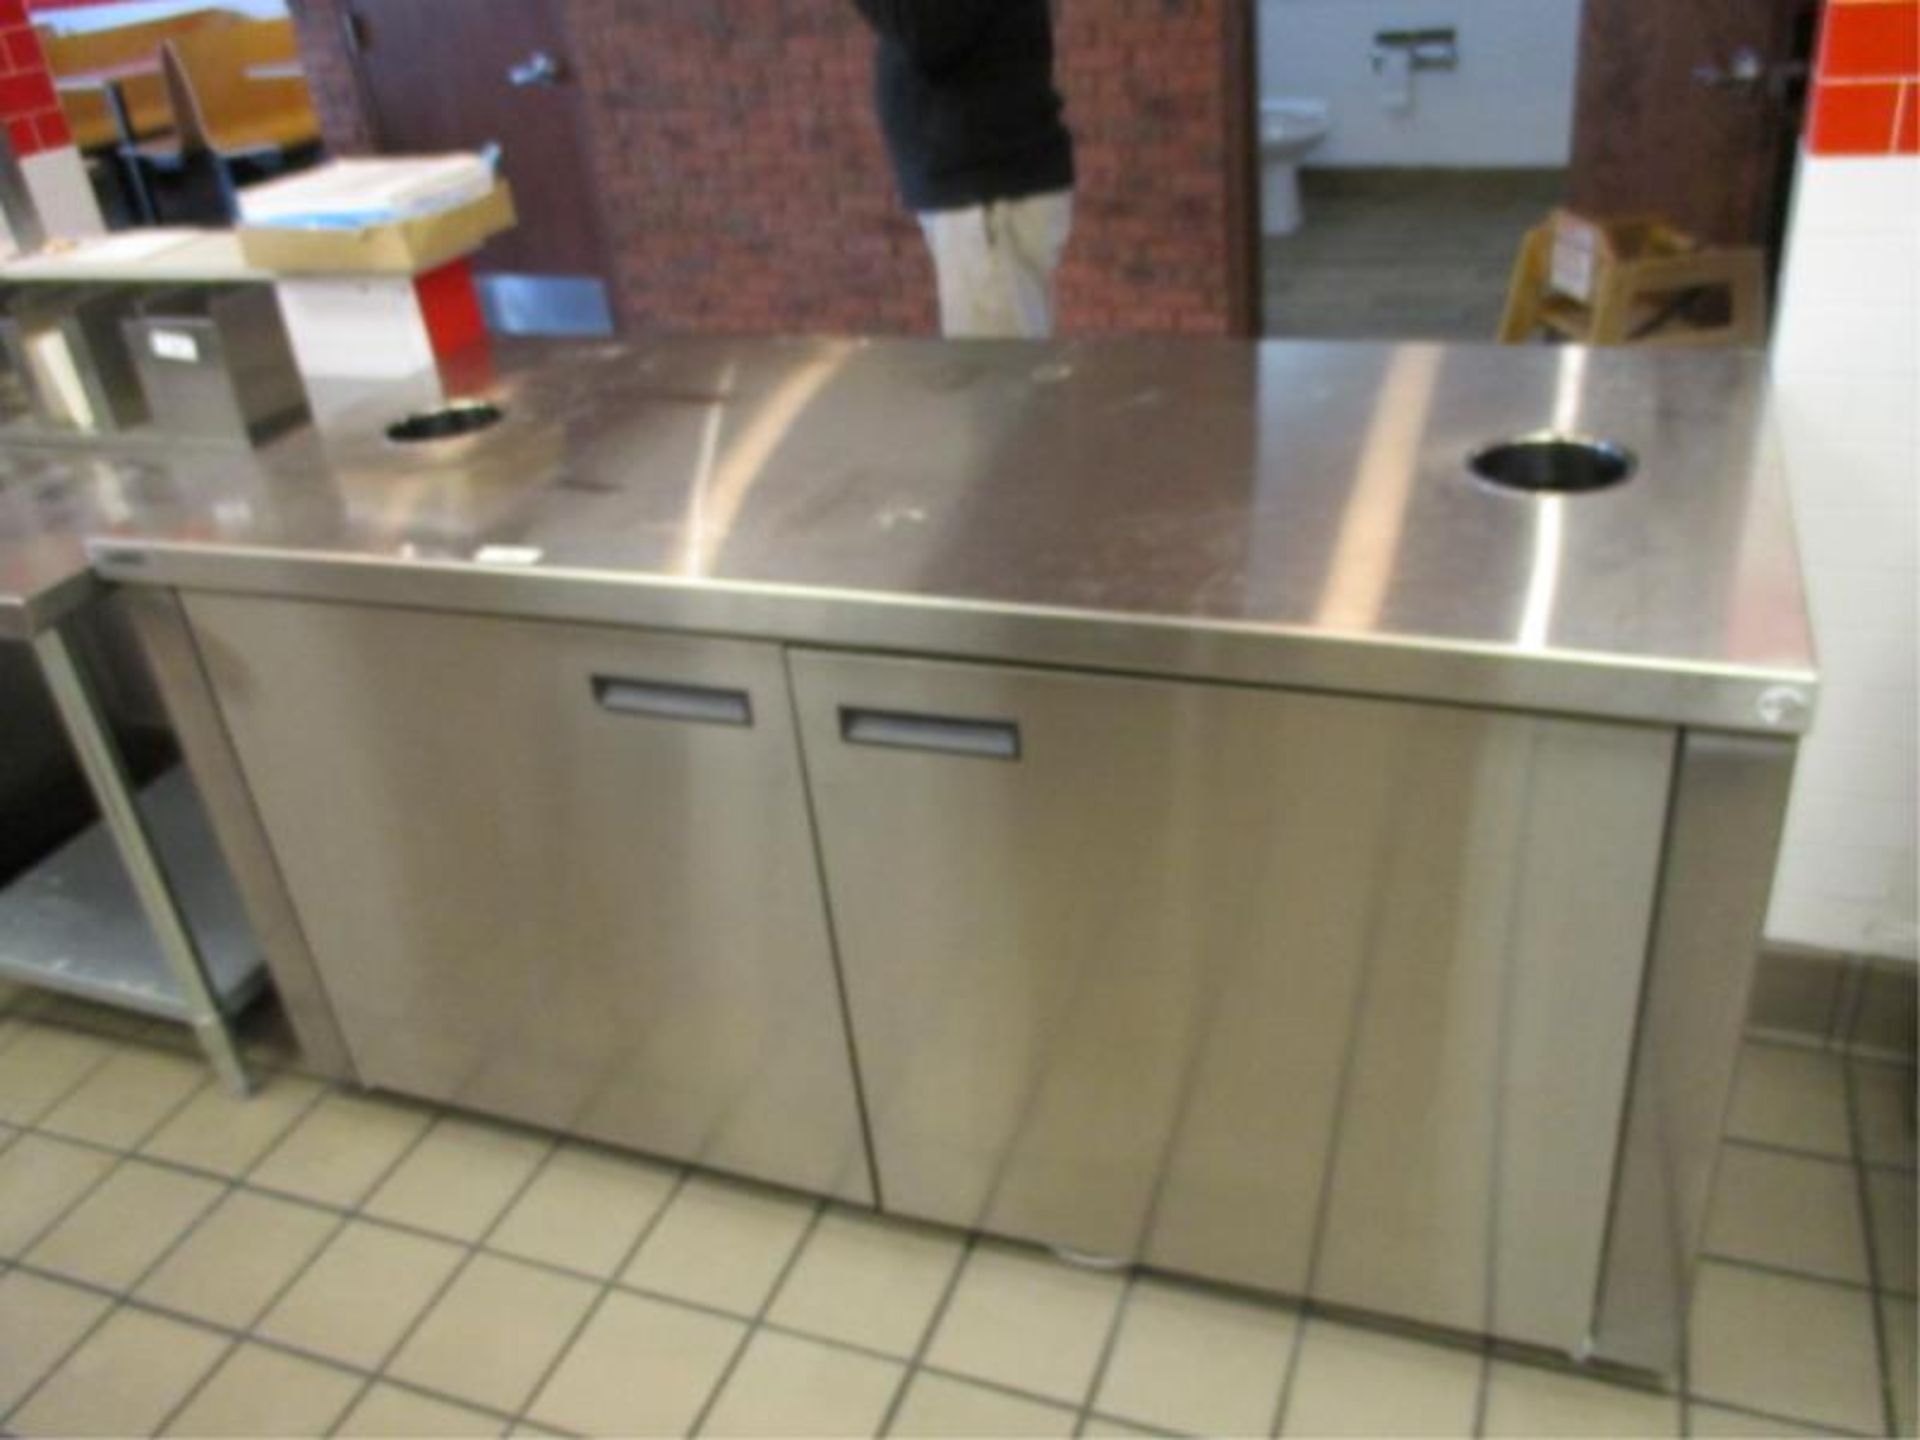 Beverage counter with 2 lower doors by Delfield, Model F16HD64, Serial # 0605150001958 - Image 8 of 8